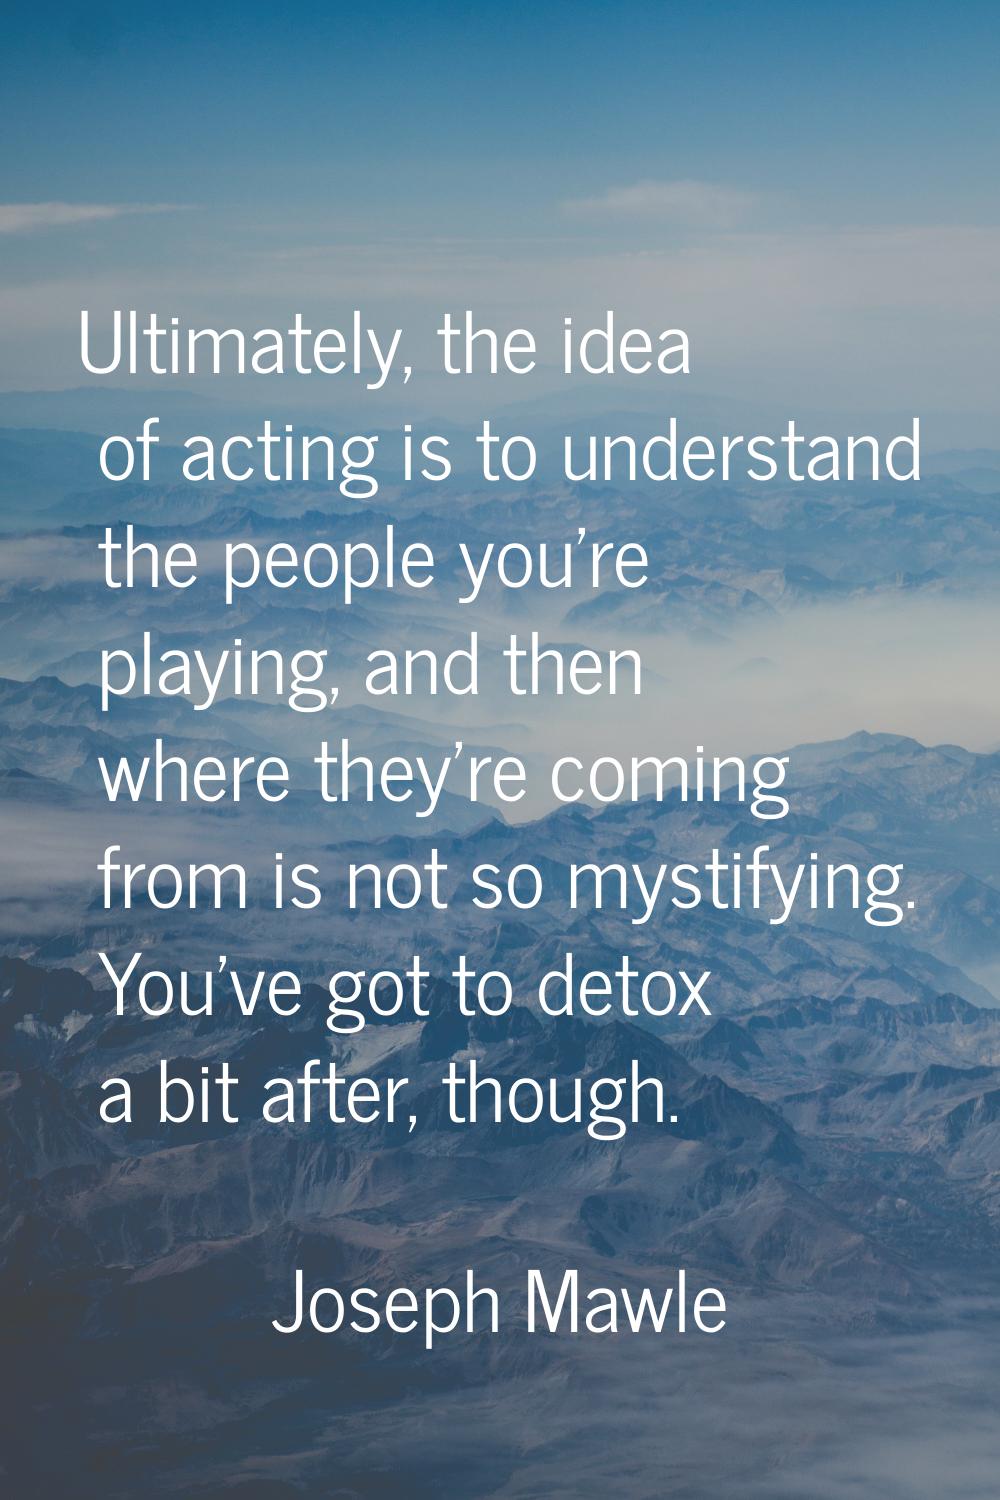 Ultimately, the idea of acting is to understand the people you're playing, and then where they're c